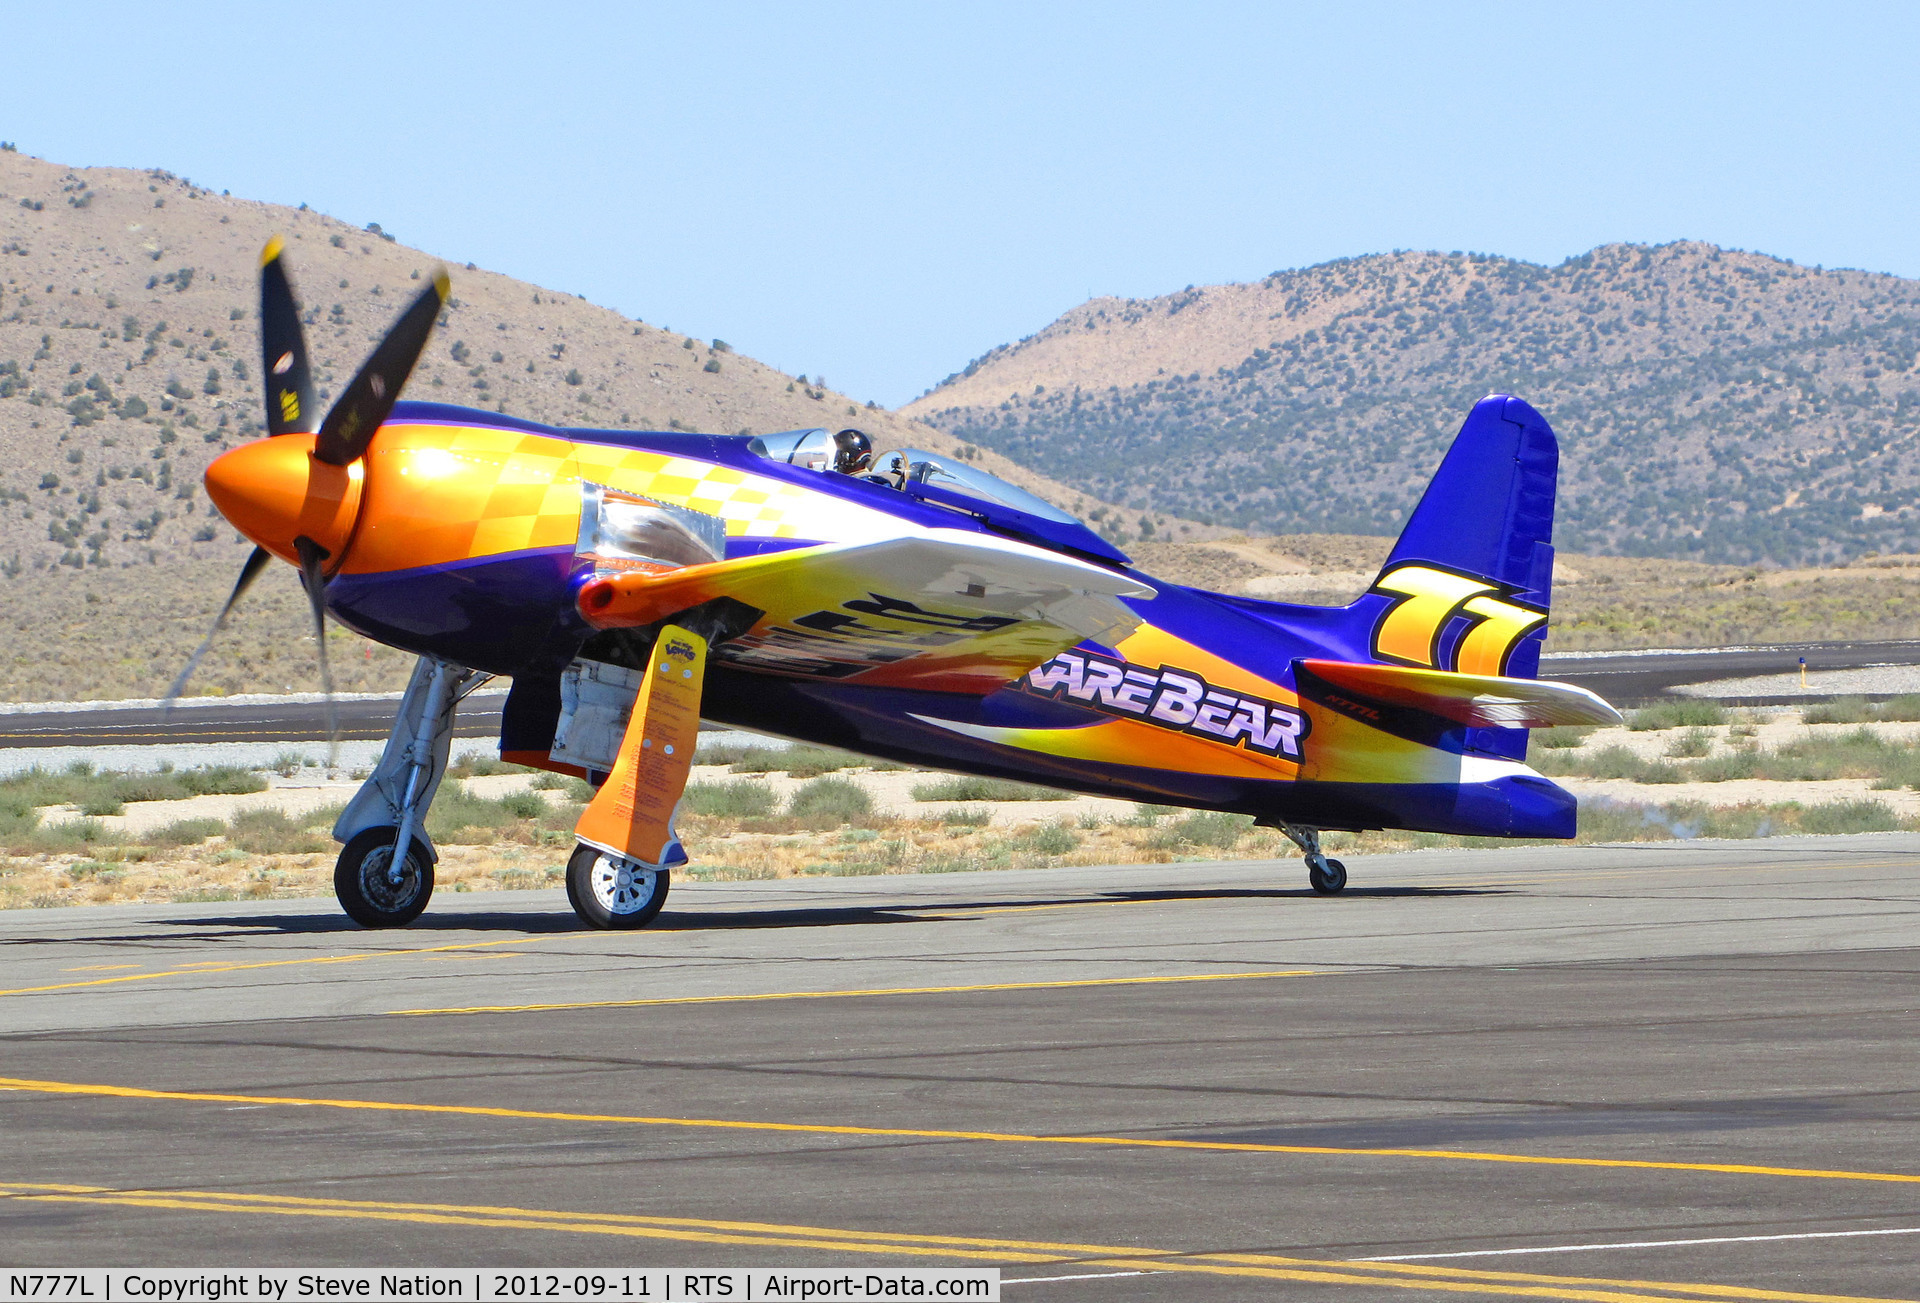 N777L, 1946 Grumman F8F-2 (G58) Bearcat C/N D.1170, Stewart Dawson piloting psychedelic F8F-2 RARE BEAR #77 after qualifying run @ on September 11, 2012 at Stead Airport during Reno Air Races